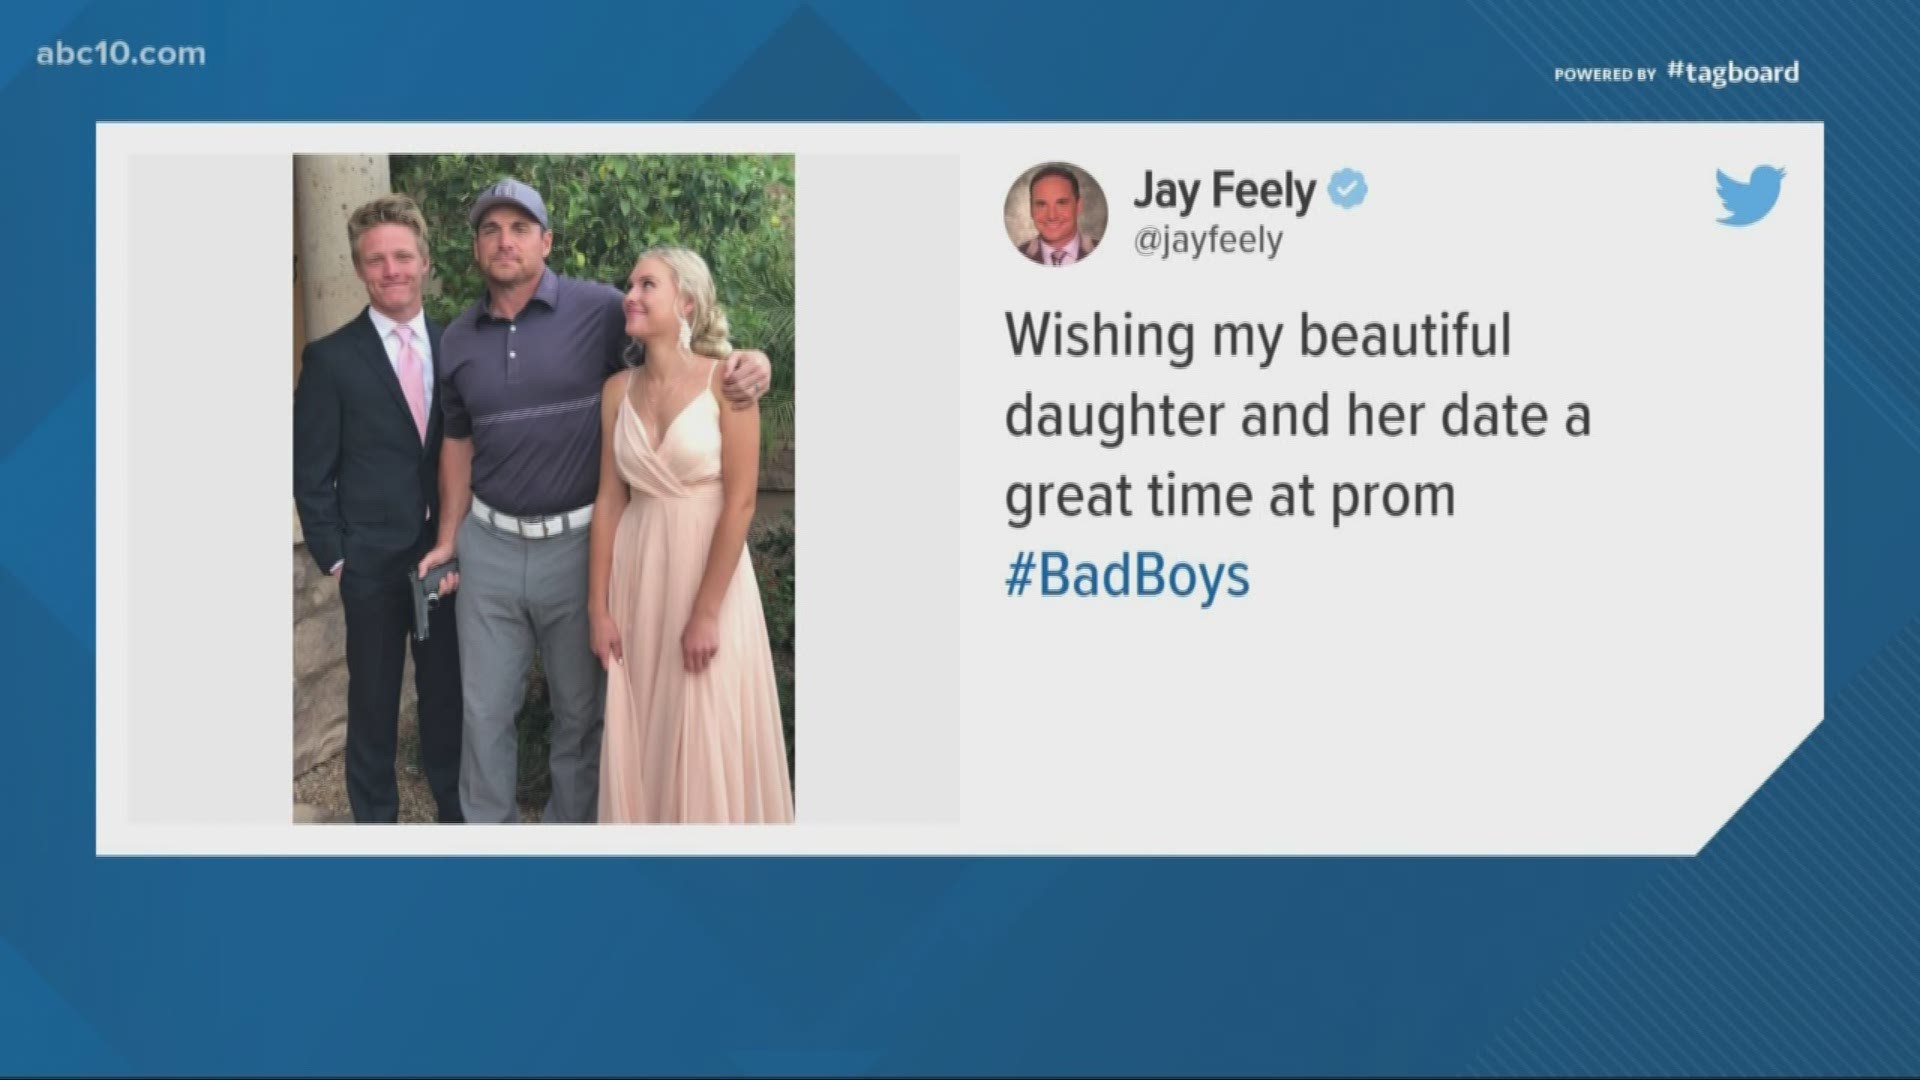 A former NFL kicker is receiving a lot of backlash after posting the photo of him holding a gun with his daughter and her prom date. He says it was a joke and has since apologized, adding he takes gun safety seriously.